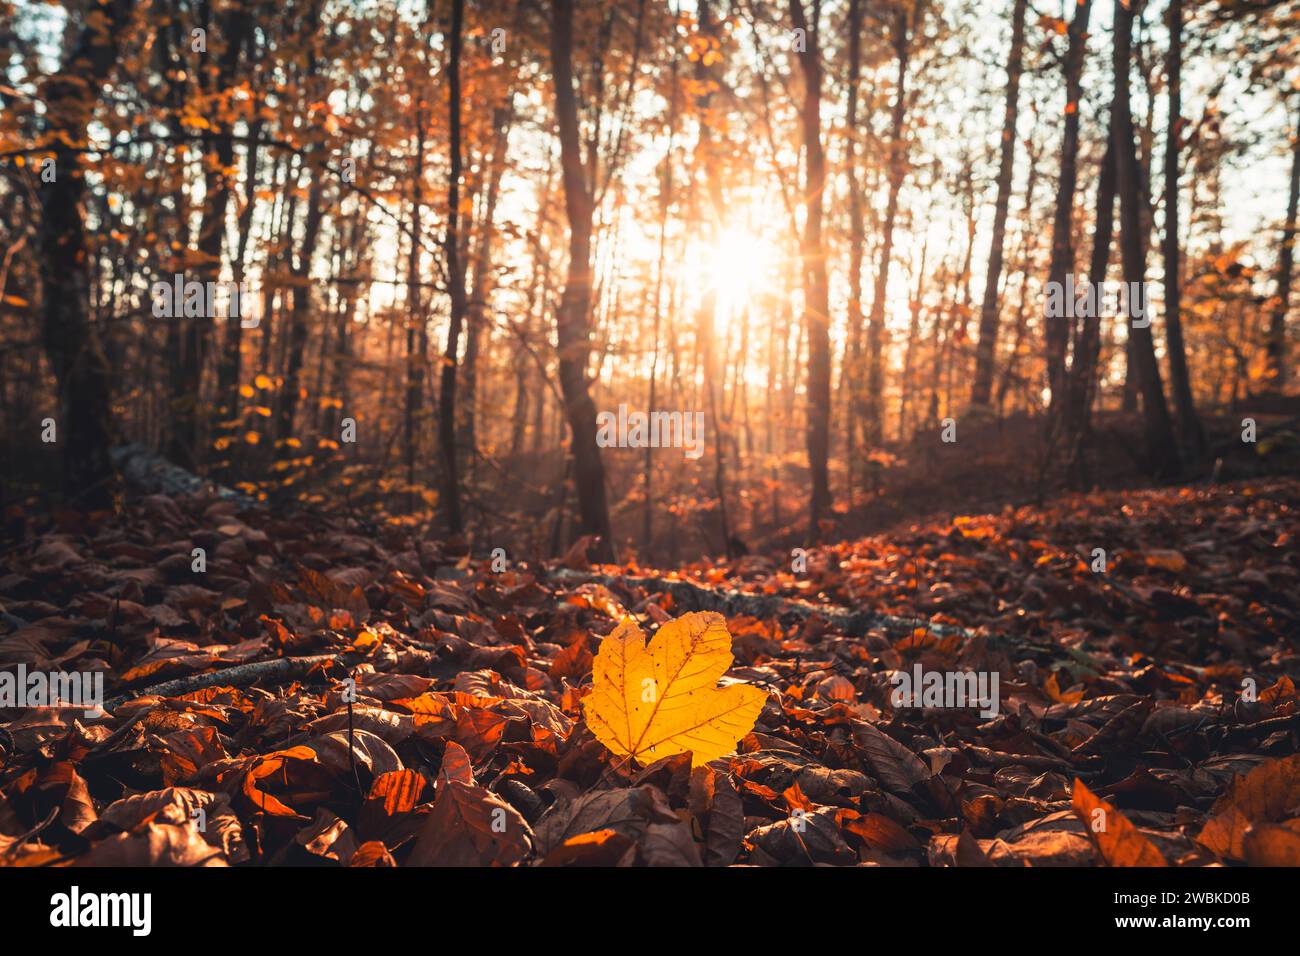 Autumn foliage in the Habichtswald near Kassel, perspective close to the ground, colorful foliage on the forest floor, a single maple leaf in the foreground, background slightly out of focus Stock Photo